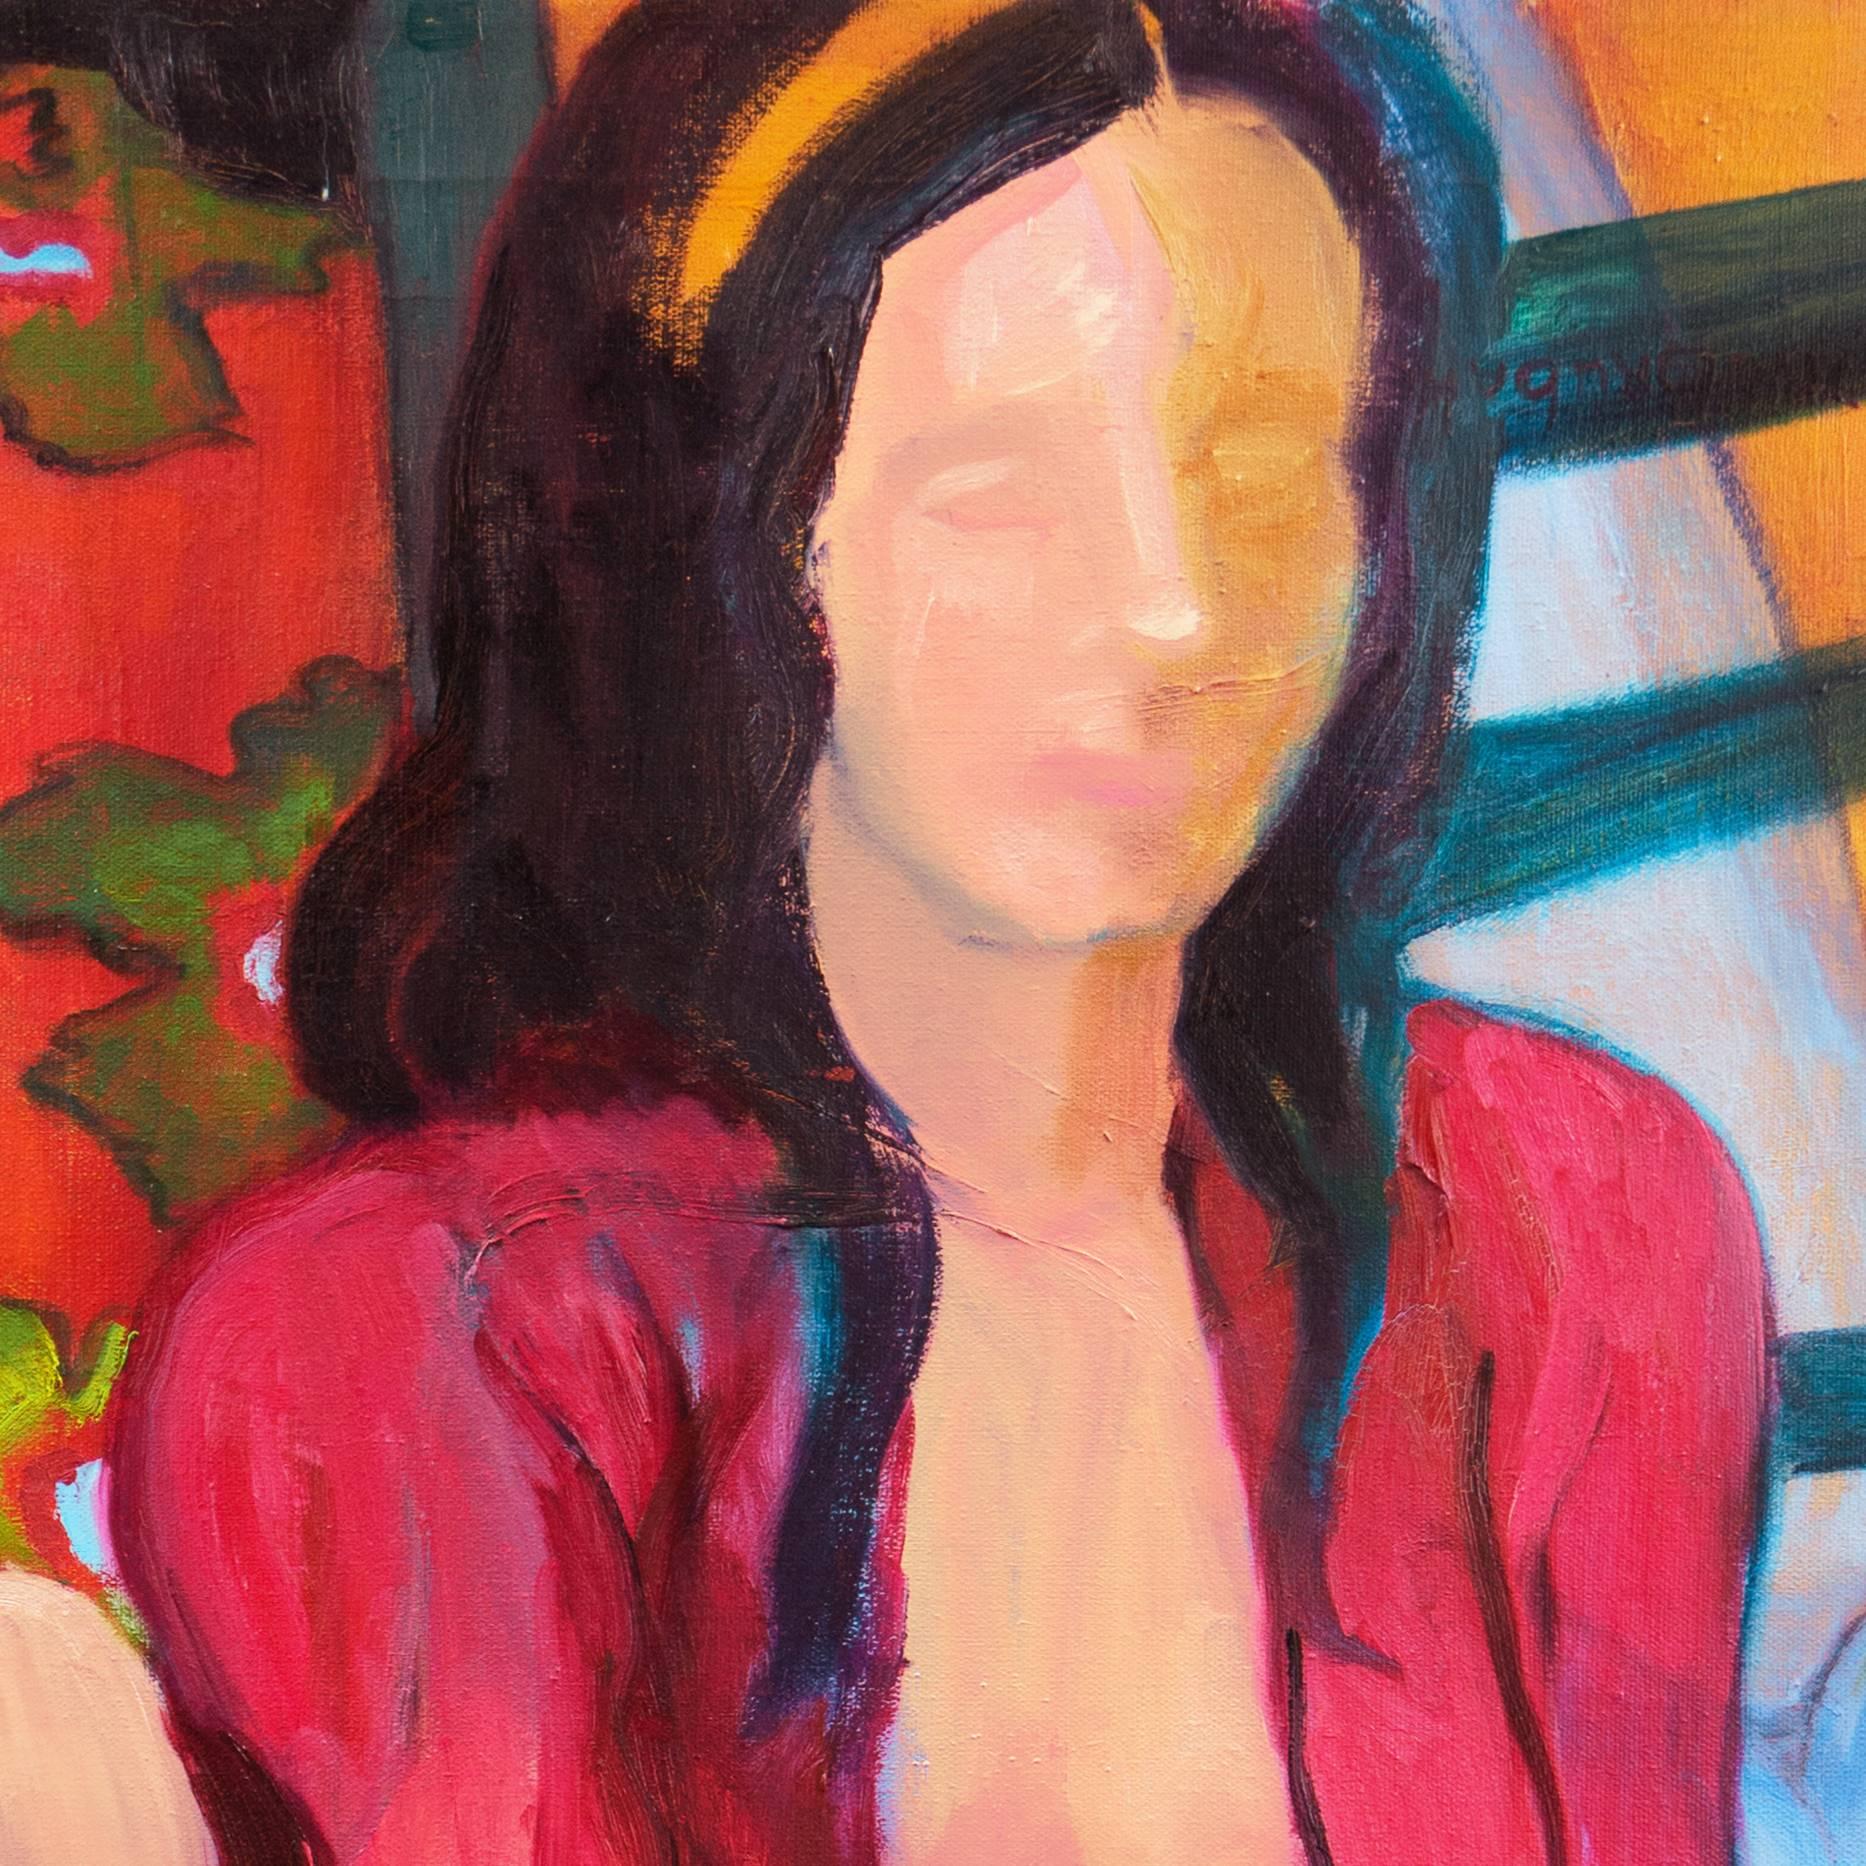 Young Woman Seated in Interior - Post-Impressionist Painting by Molly E. Brubaker